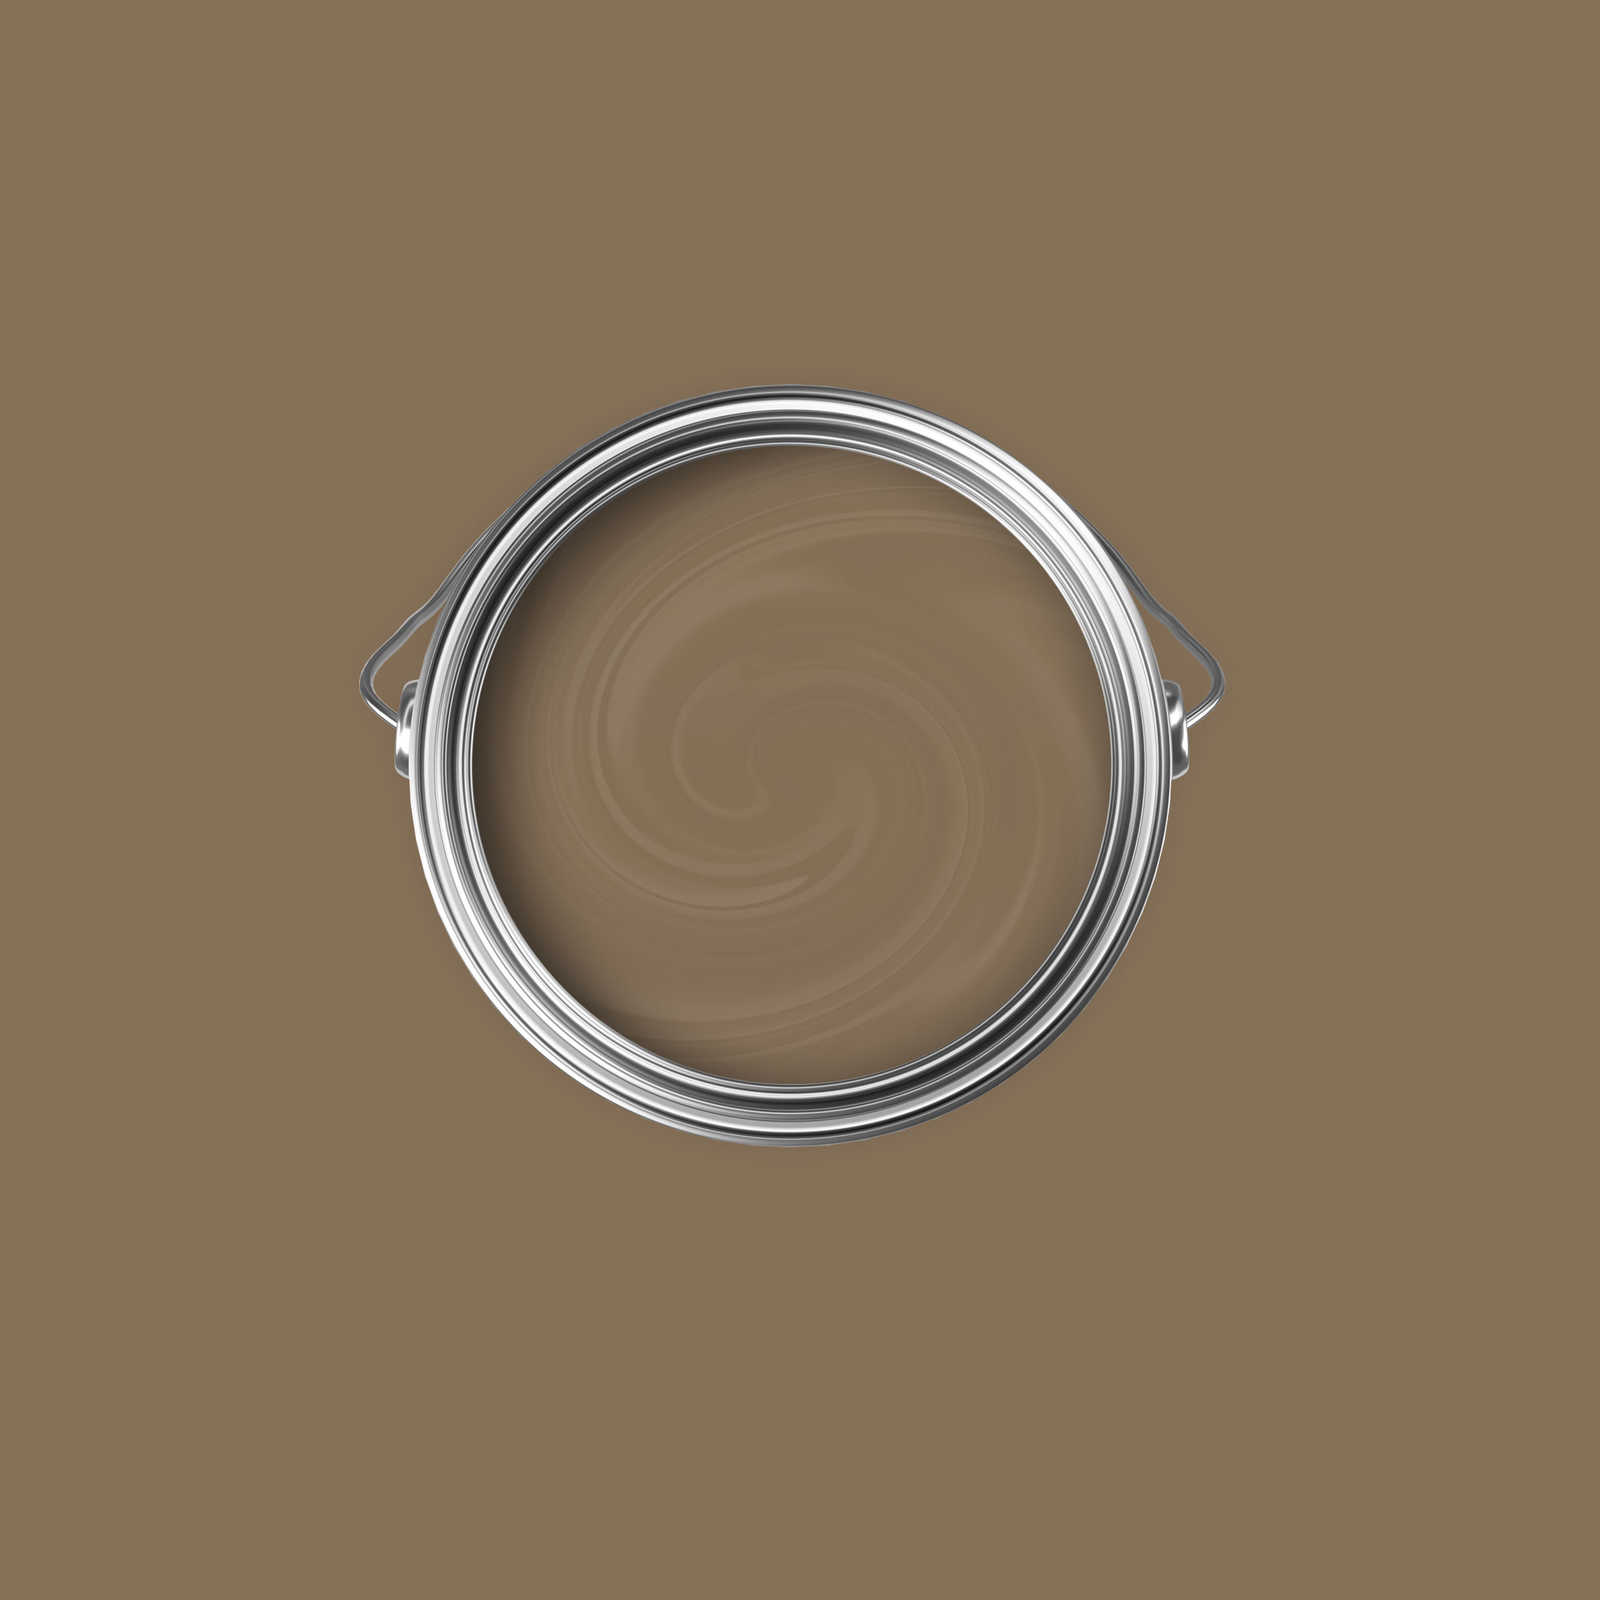             Premium Wall Paint Soothing Brown »Essential Earth« NW711 – 2.5 litre
        